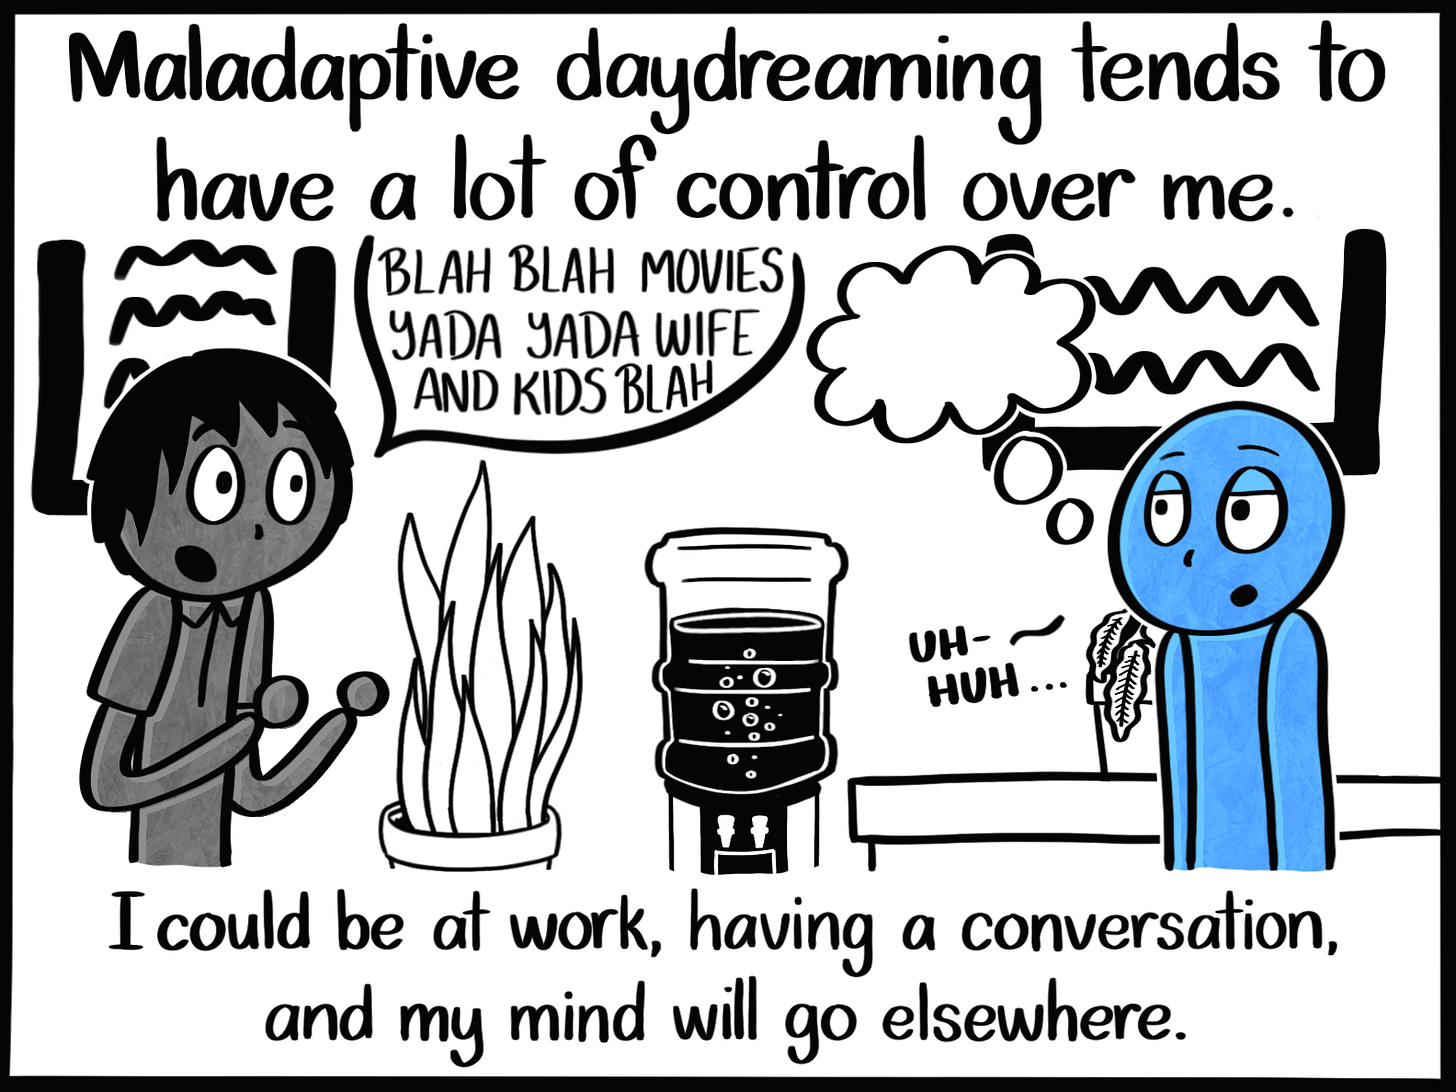 Caption: Maladaptive daydreaming tends to have a lot of control over me. I could be at work, having a conversation, and my mind will go elsewhere. Image: The Blue Person looking bored while talking to a coworker. The coworker has a speech bubble that reads, "BLAH BLAH MOVIES YADA YADA WIFE AND KIDS BLAH" while the Blue Person has a dream bubble. They also mutter, "Uh-huh..."